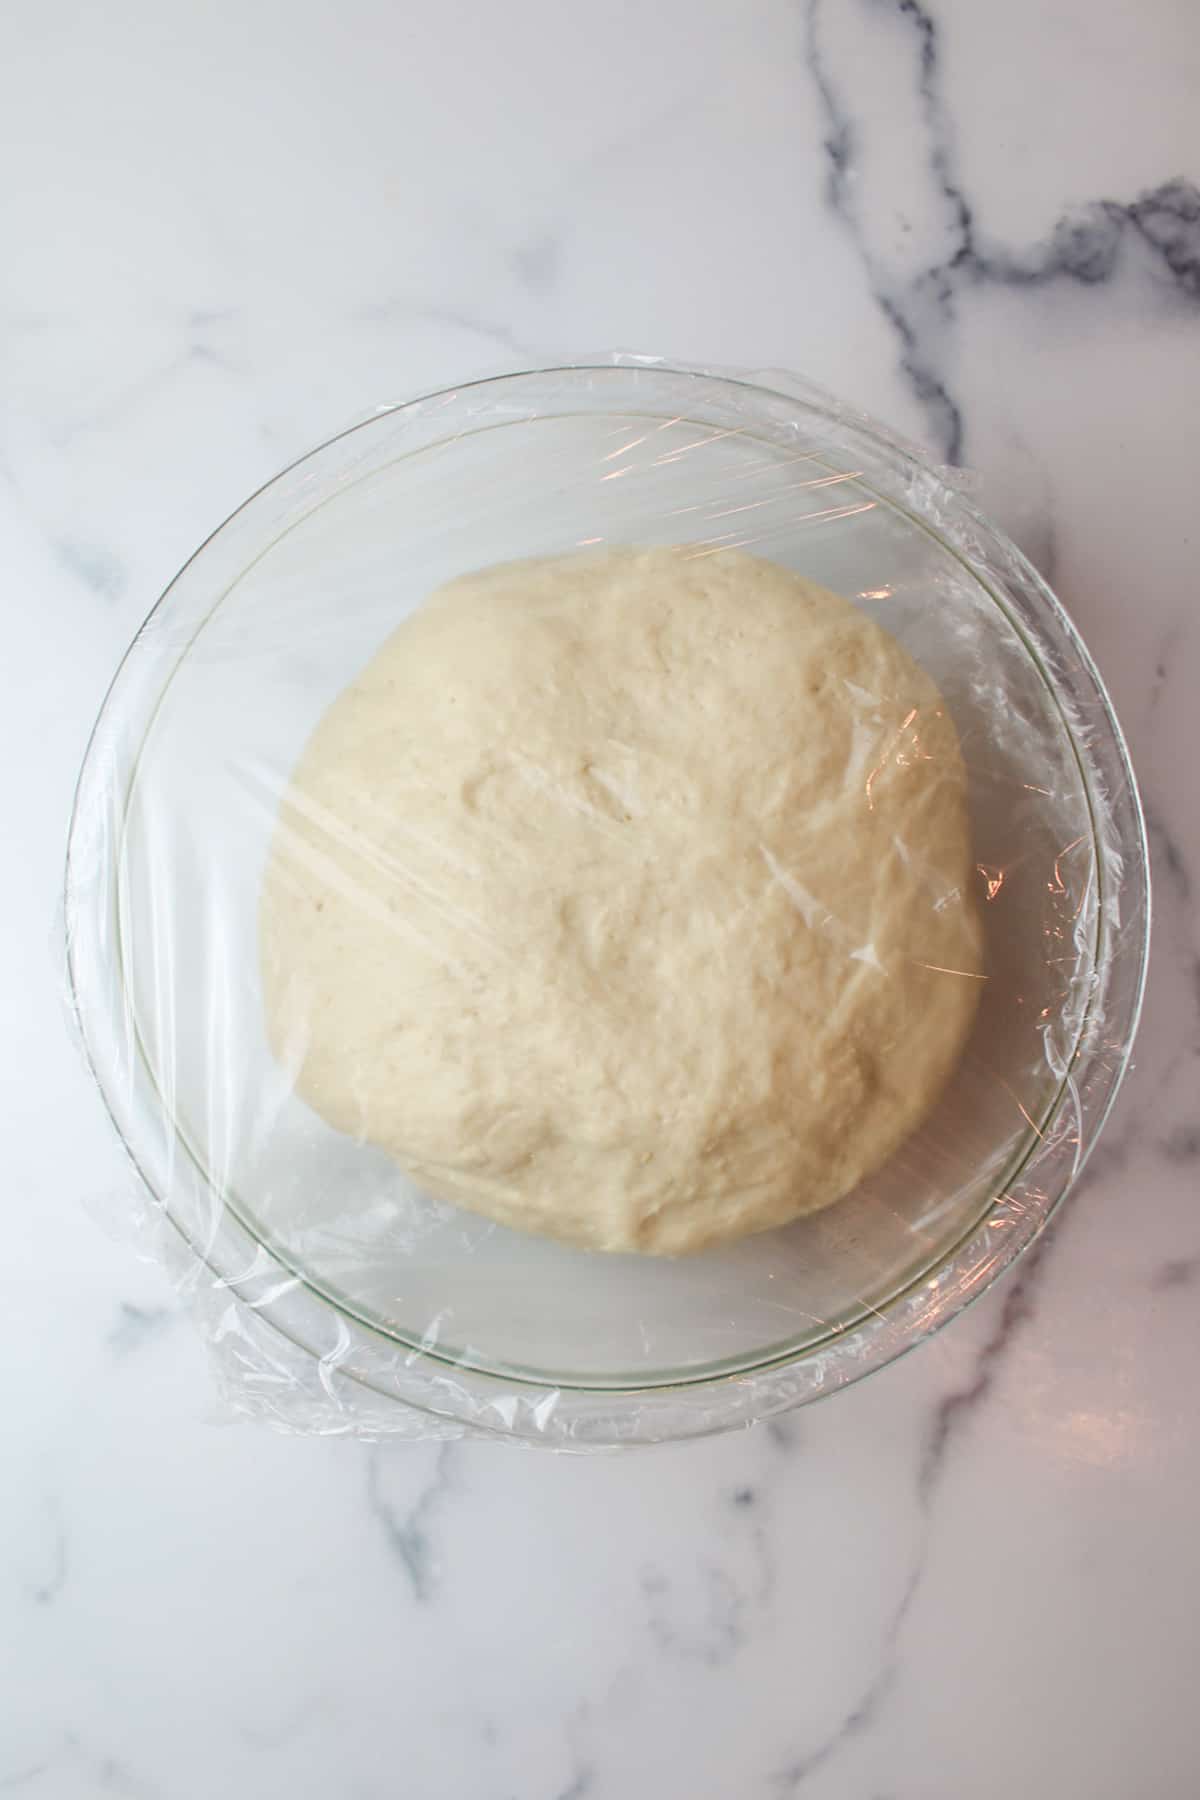 proofed dough in a mixing bowl topped with plastic wrap